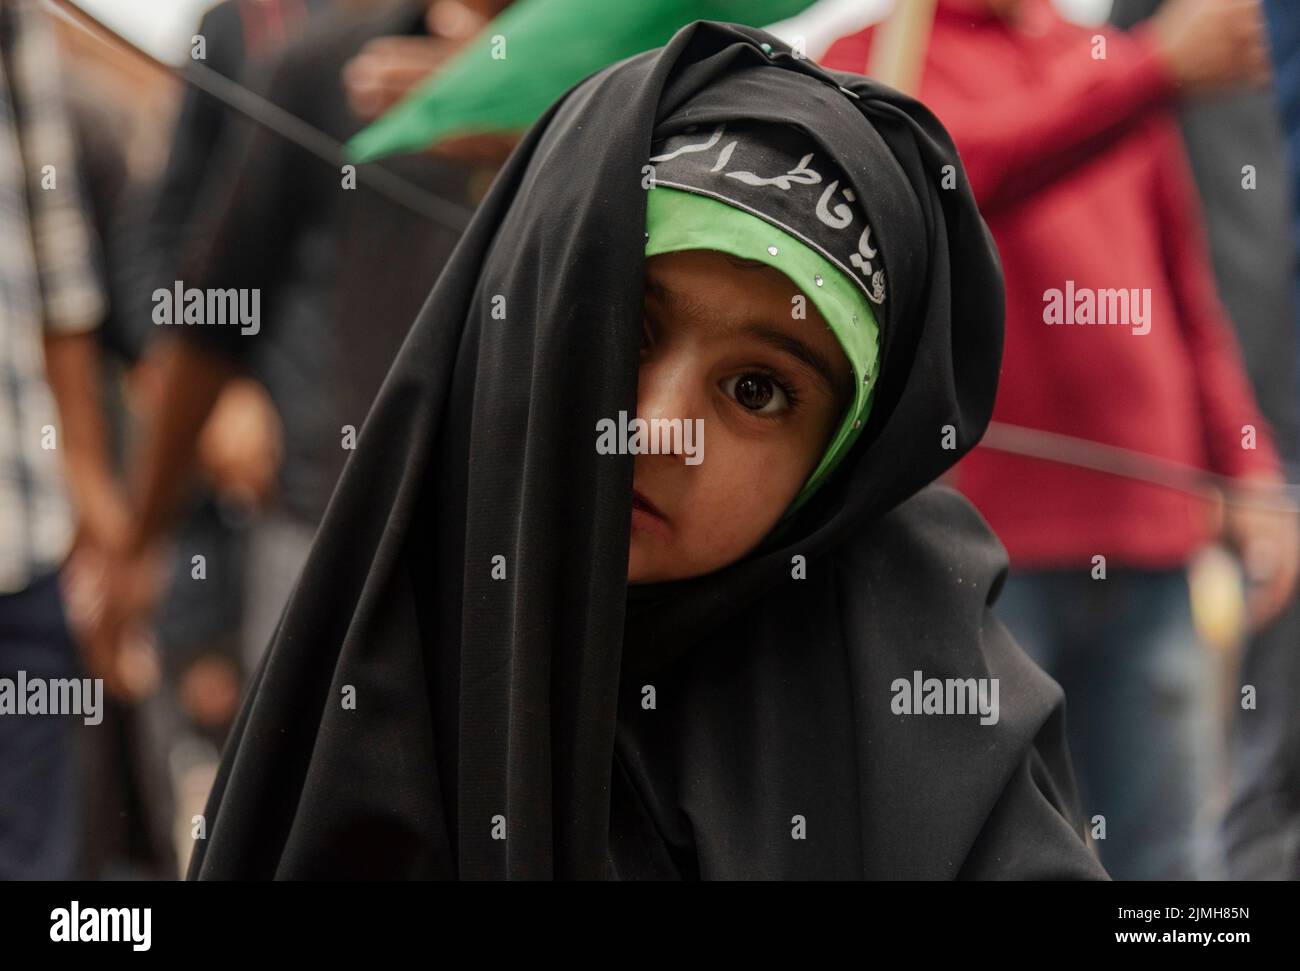 A Shia Muslim girl looks on as she participates in a procession on the 7th day of Muharram. Muharram is the first month of Islam. It is one of the holiest months on the Islamic calendar. Shia Muslims commemorate Muharram as a month of mourning in remembrance of the martyrdom of the Islamic Prophet Muhammad's grandson Imam Hussain, who was killed on Ashura (10th day of Muharram) in the battle of Karbala in 680 A.D. Stock Photo